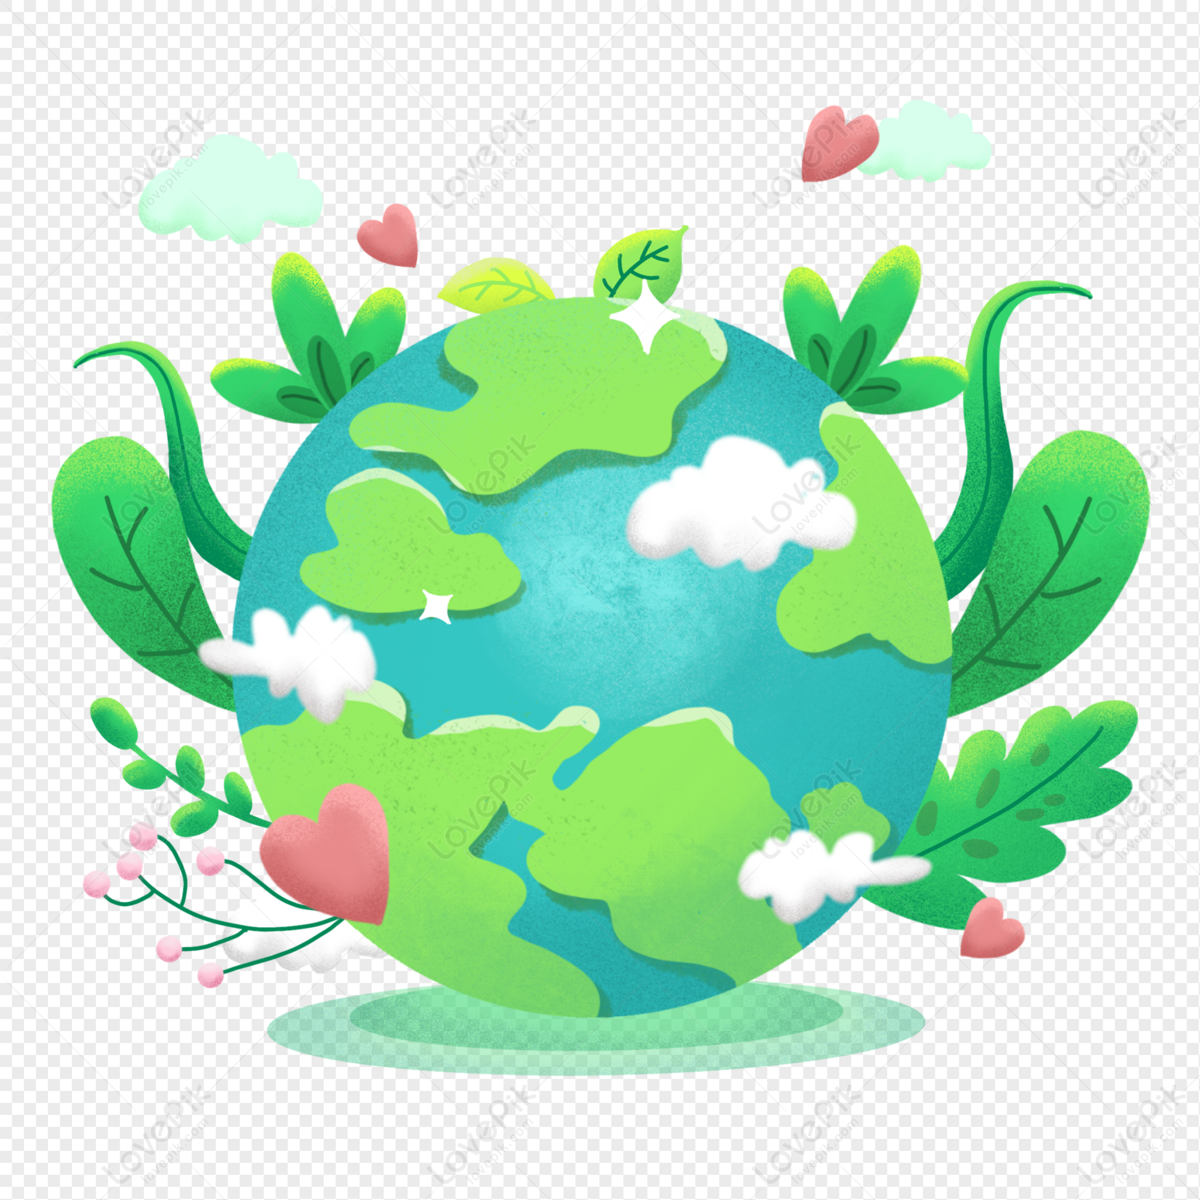 Earth Cartoon Images, HD Pictures For Free Vectors Download 